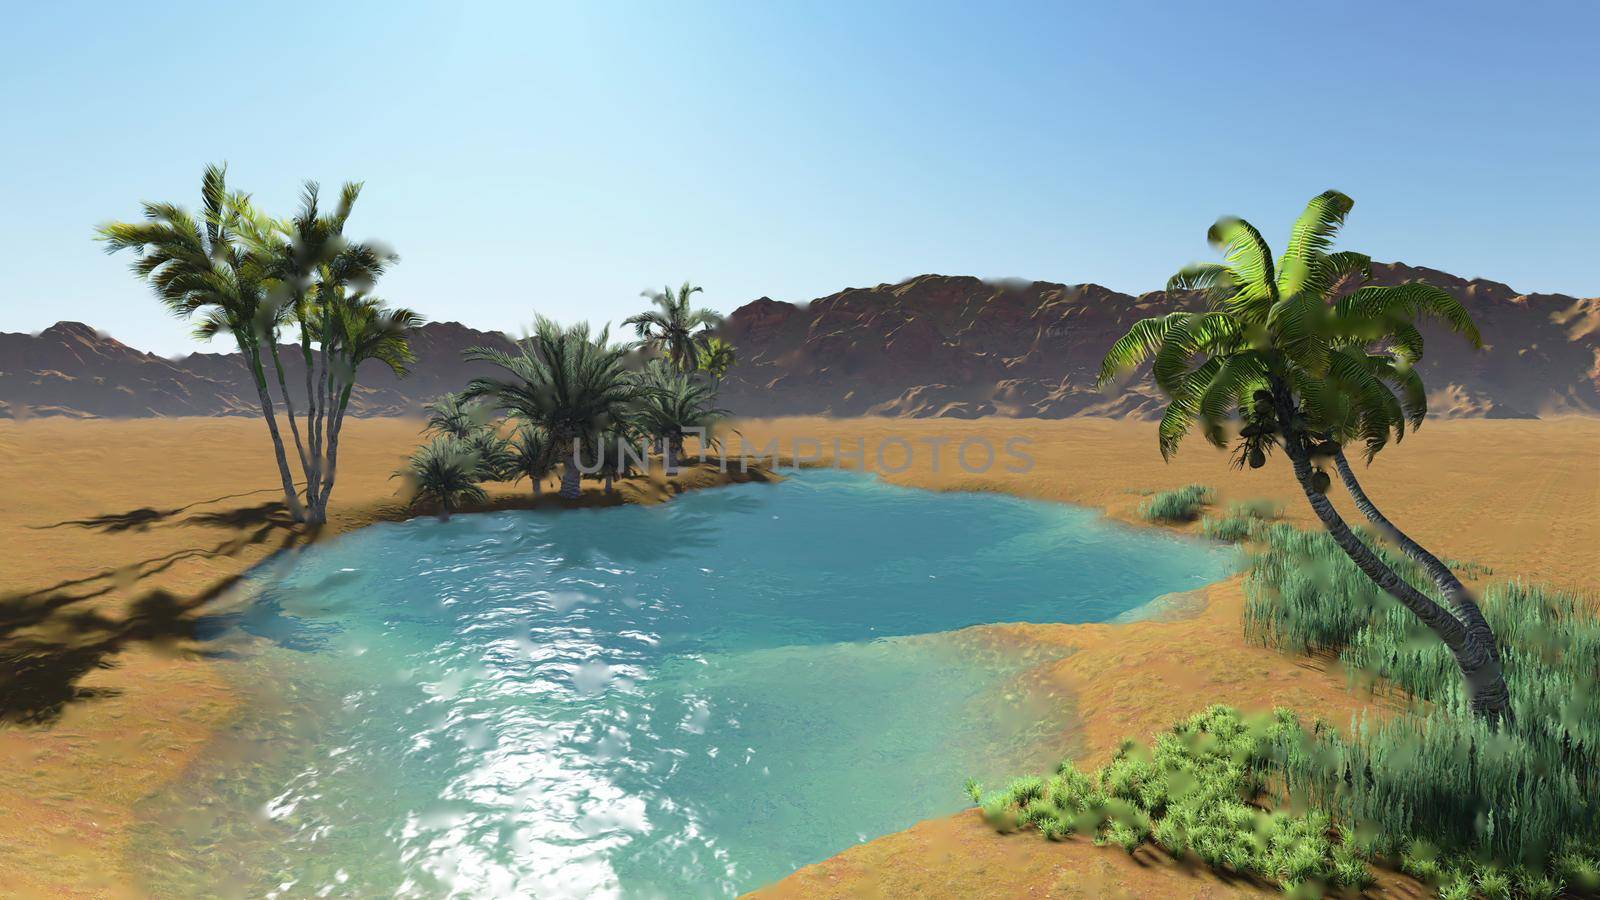 3d illustration - Oasis in the desert, dark blue clear water surrounded by palm trees and sand dunes on a very hot day